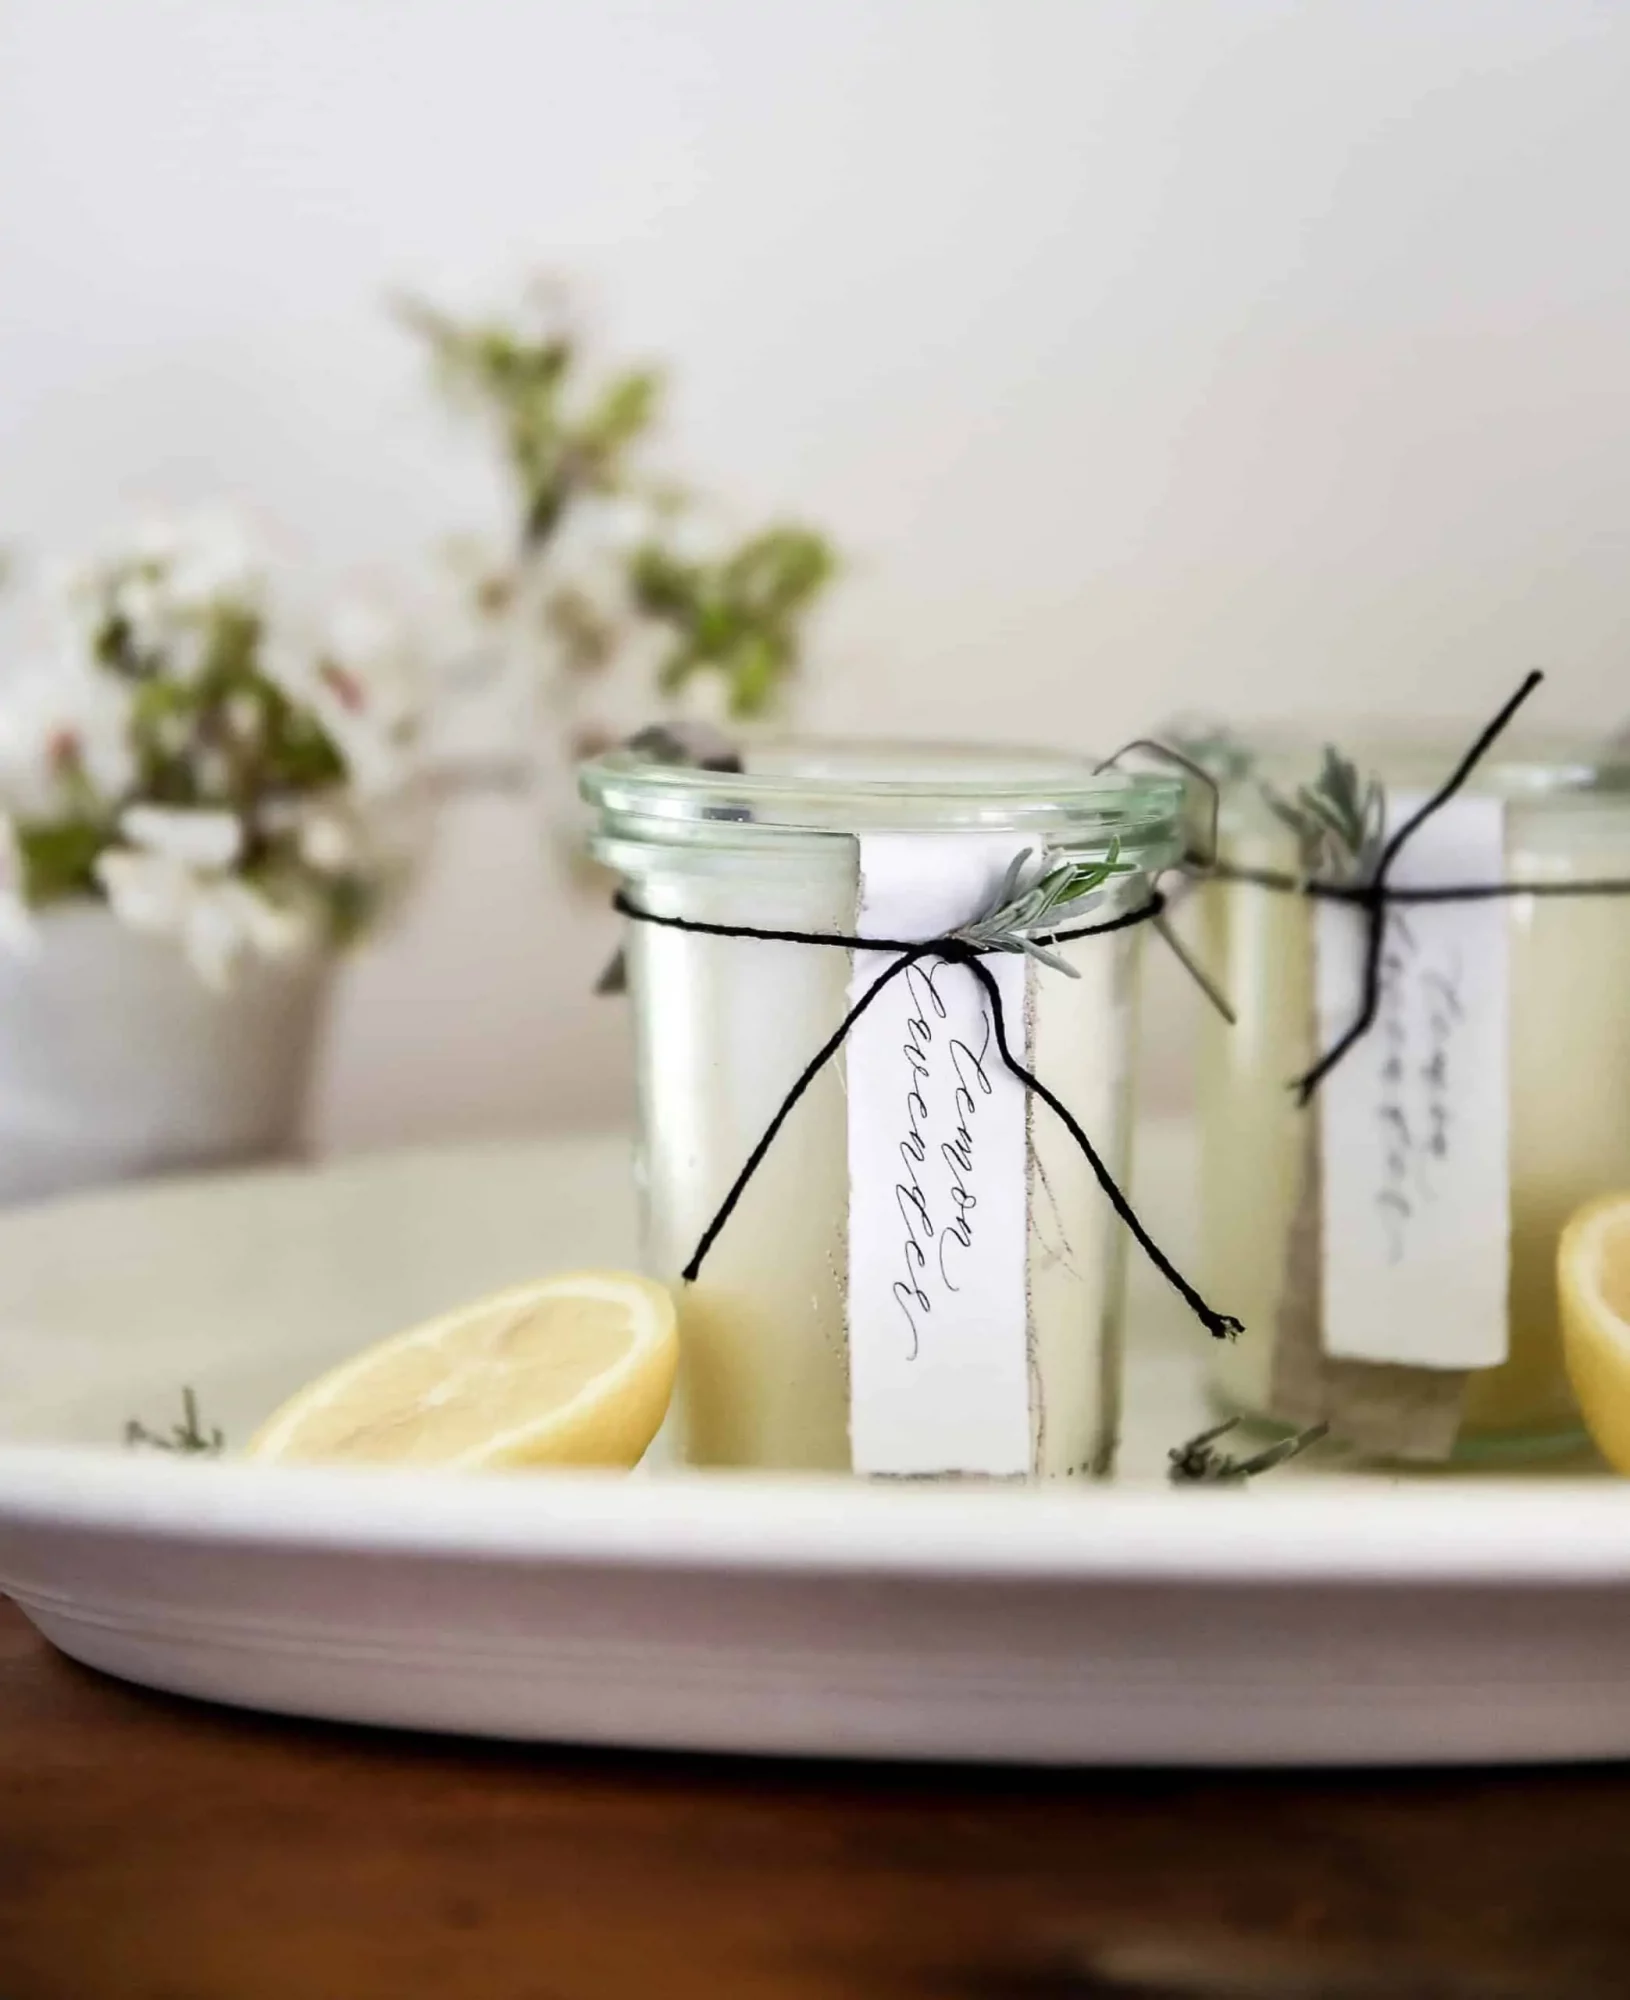 Glass jars hold two lemon lavender candles on a white plate